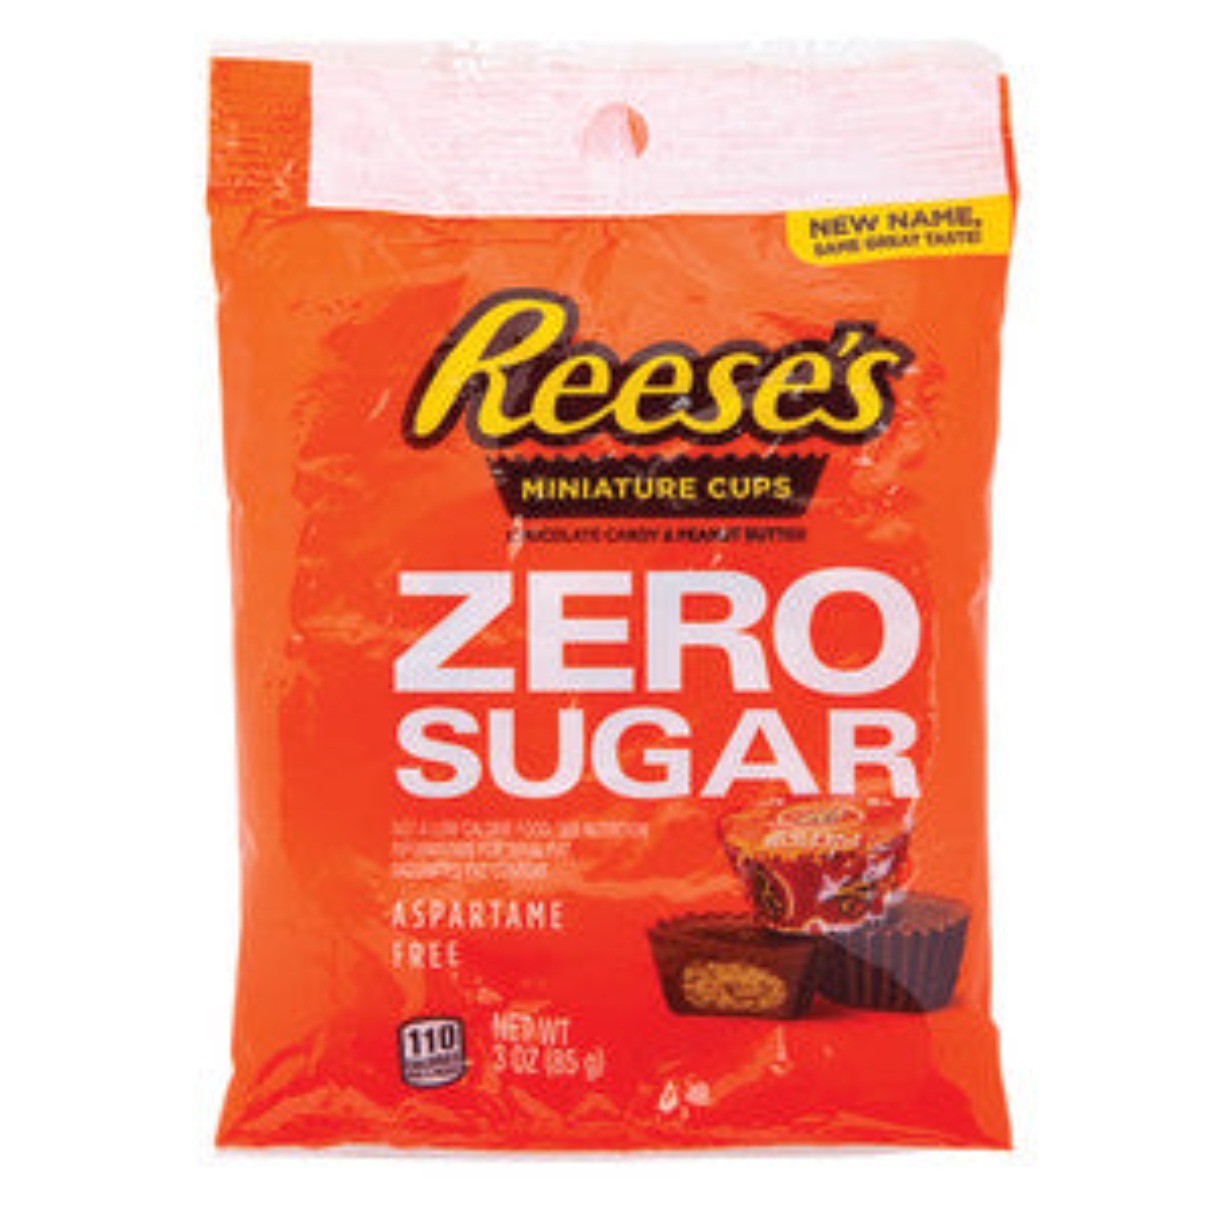 Reese's Peanut Butter Cups Sugar Free 3oz - 12ct